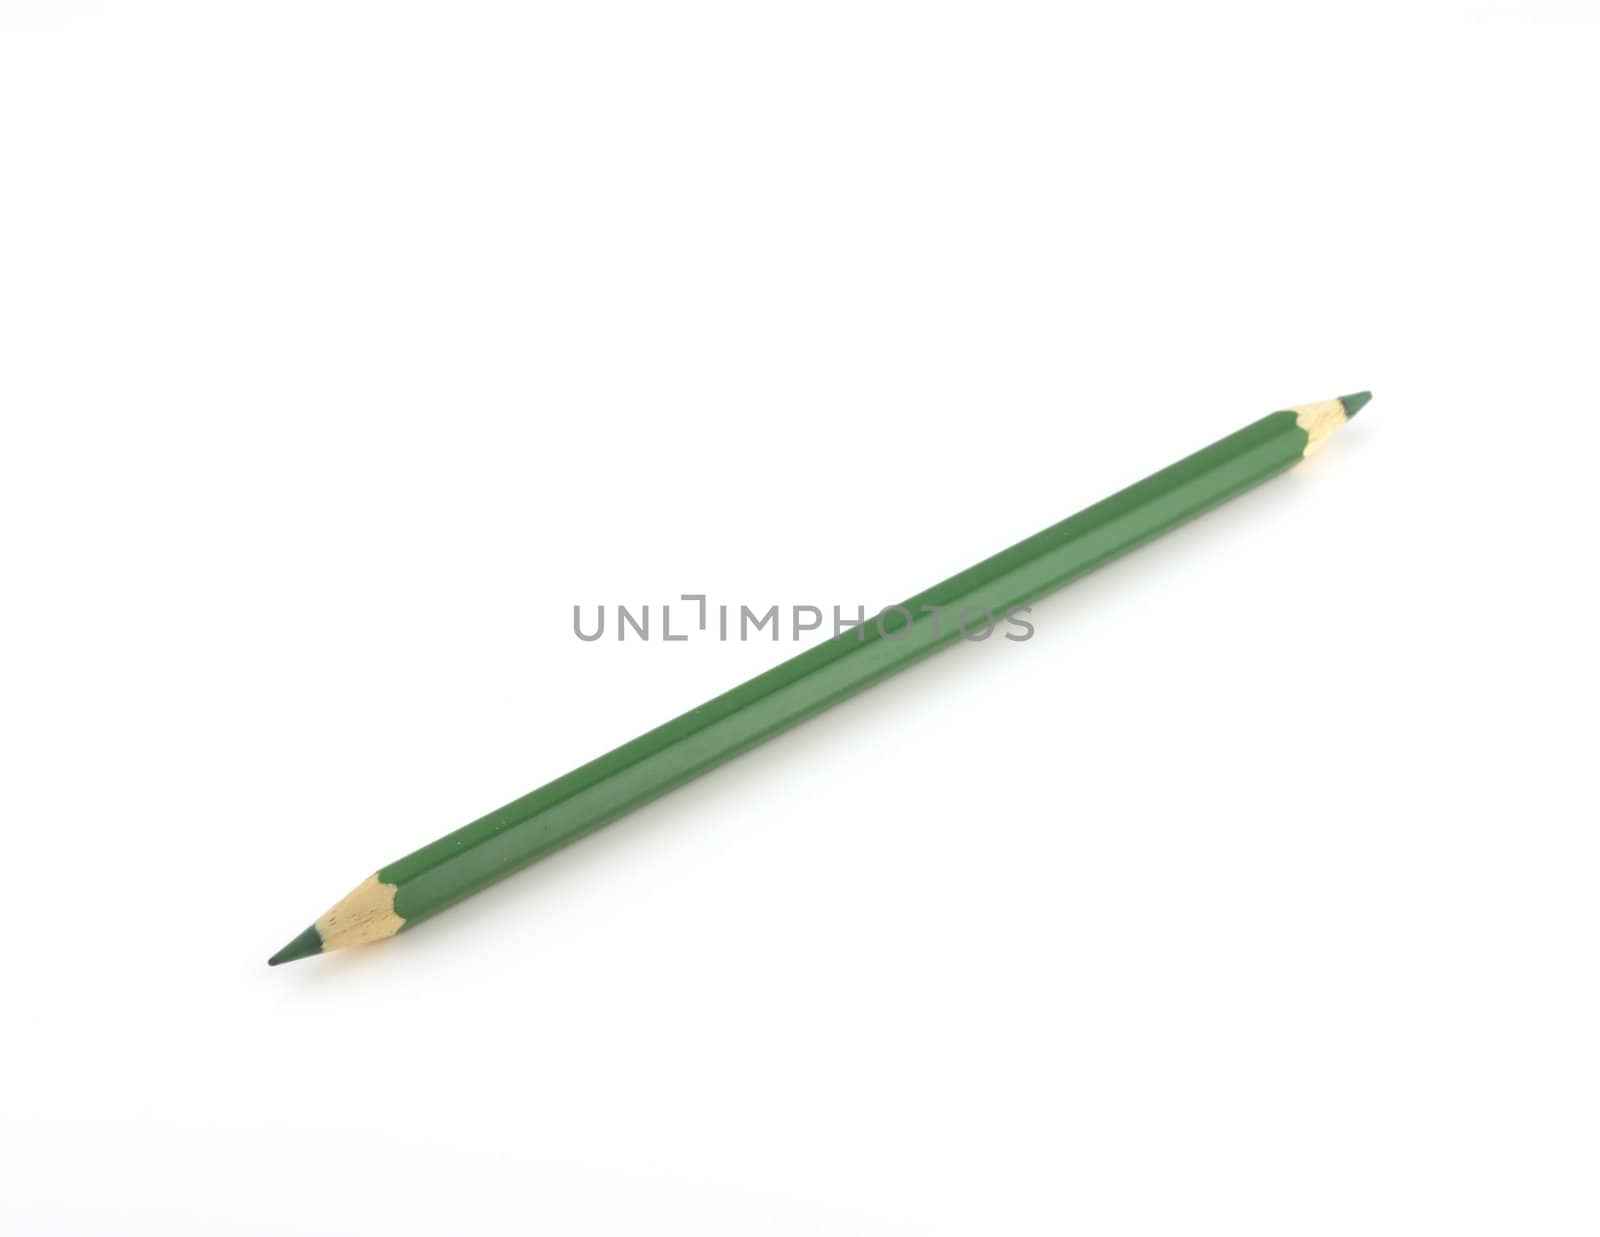 Green pencil by sergpet